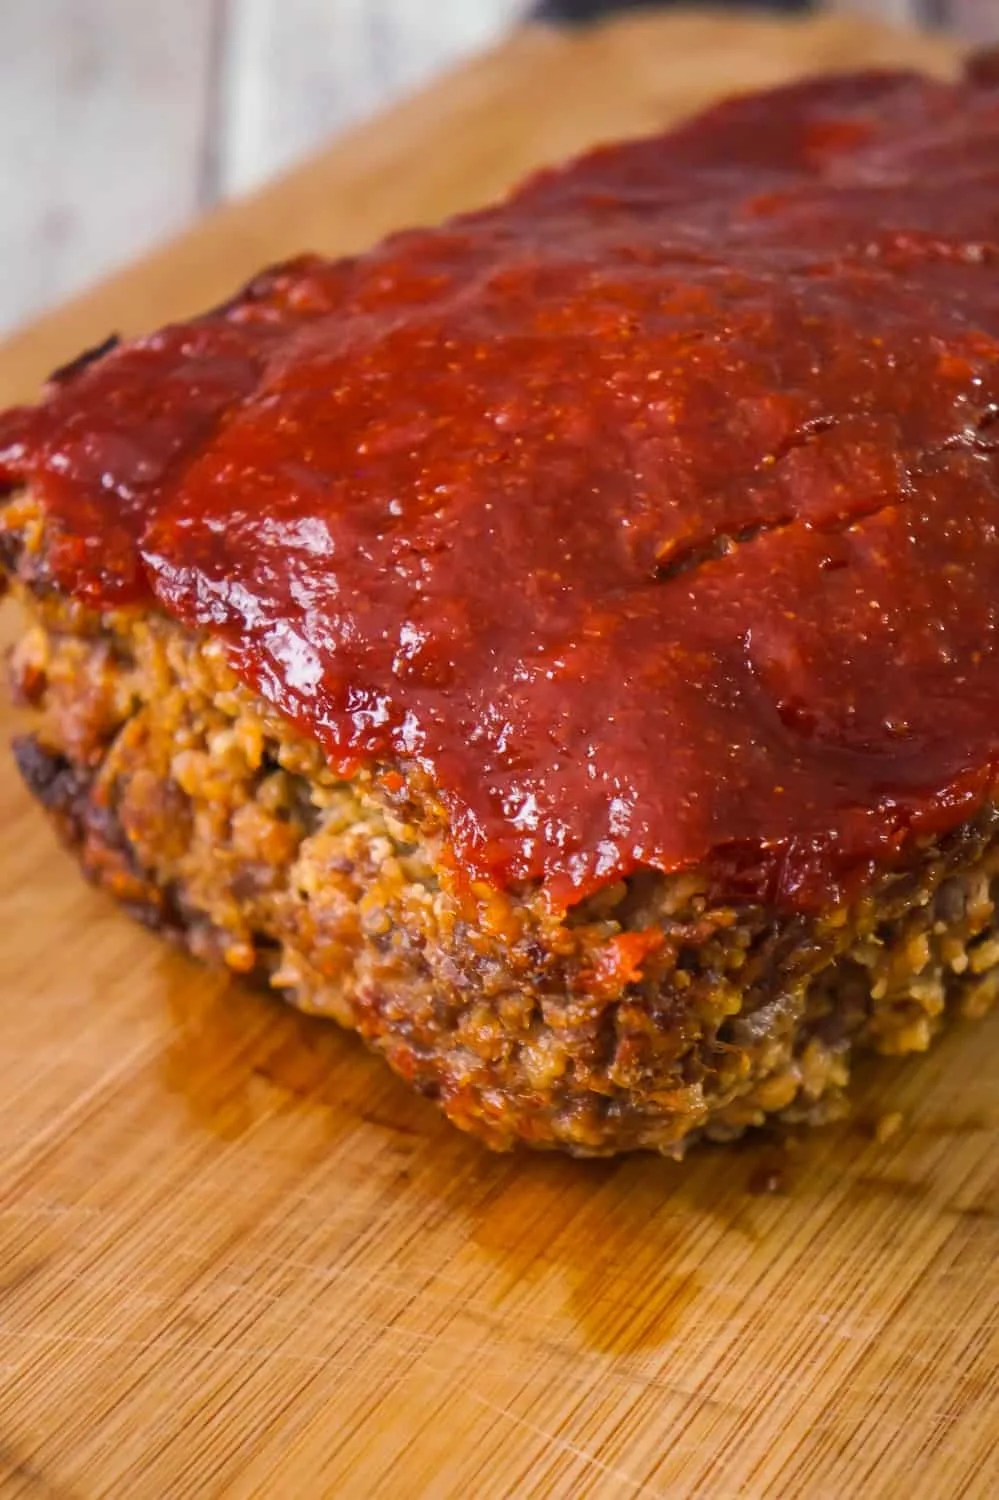 Meatloaf with Oatmeal is an easy ground beef dinner recipe. This easy meatloaf recipe is made with quick oats and Lipton onion soup mix.